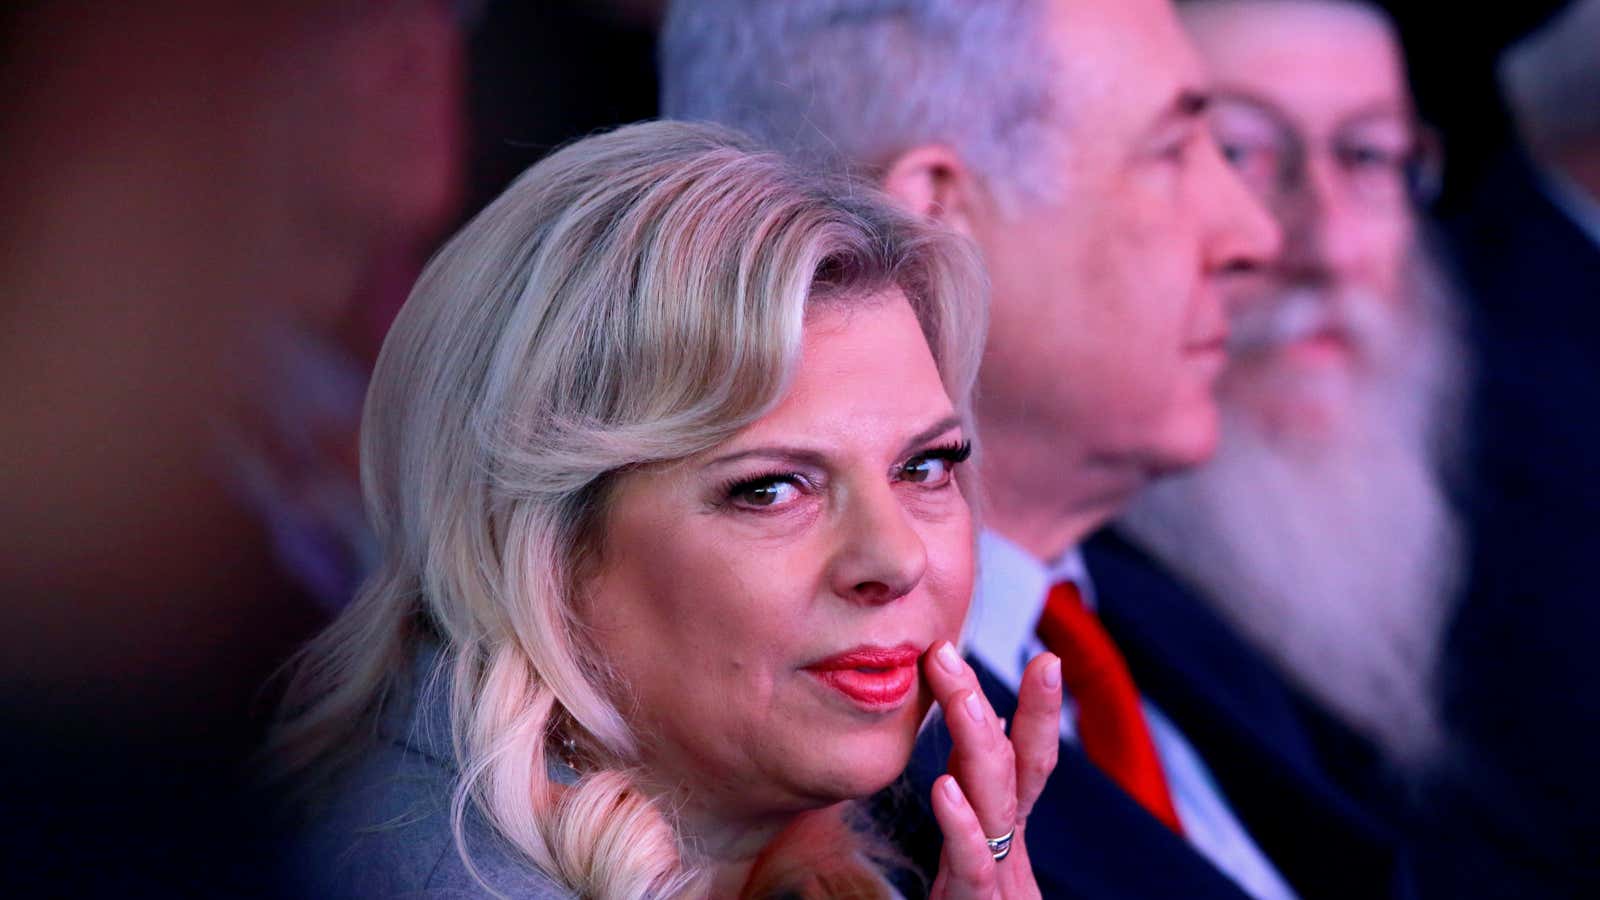 Did Sara Netanyahu, wife of Israeli Prime Minister Benjamin Netanyahu, misuse government funds to fuel her hunger?